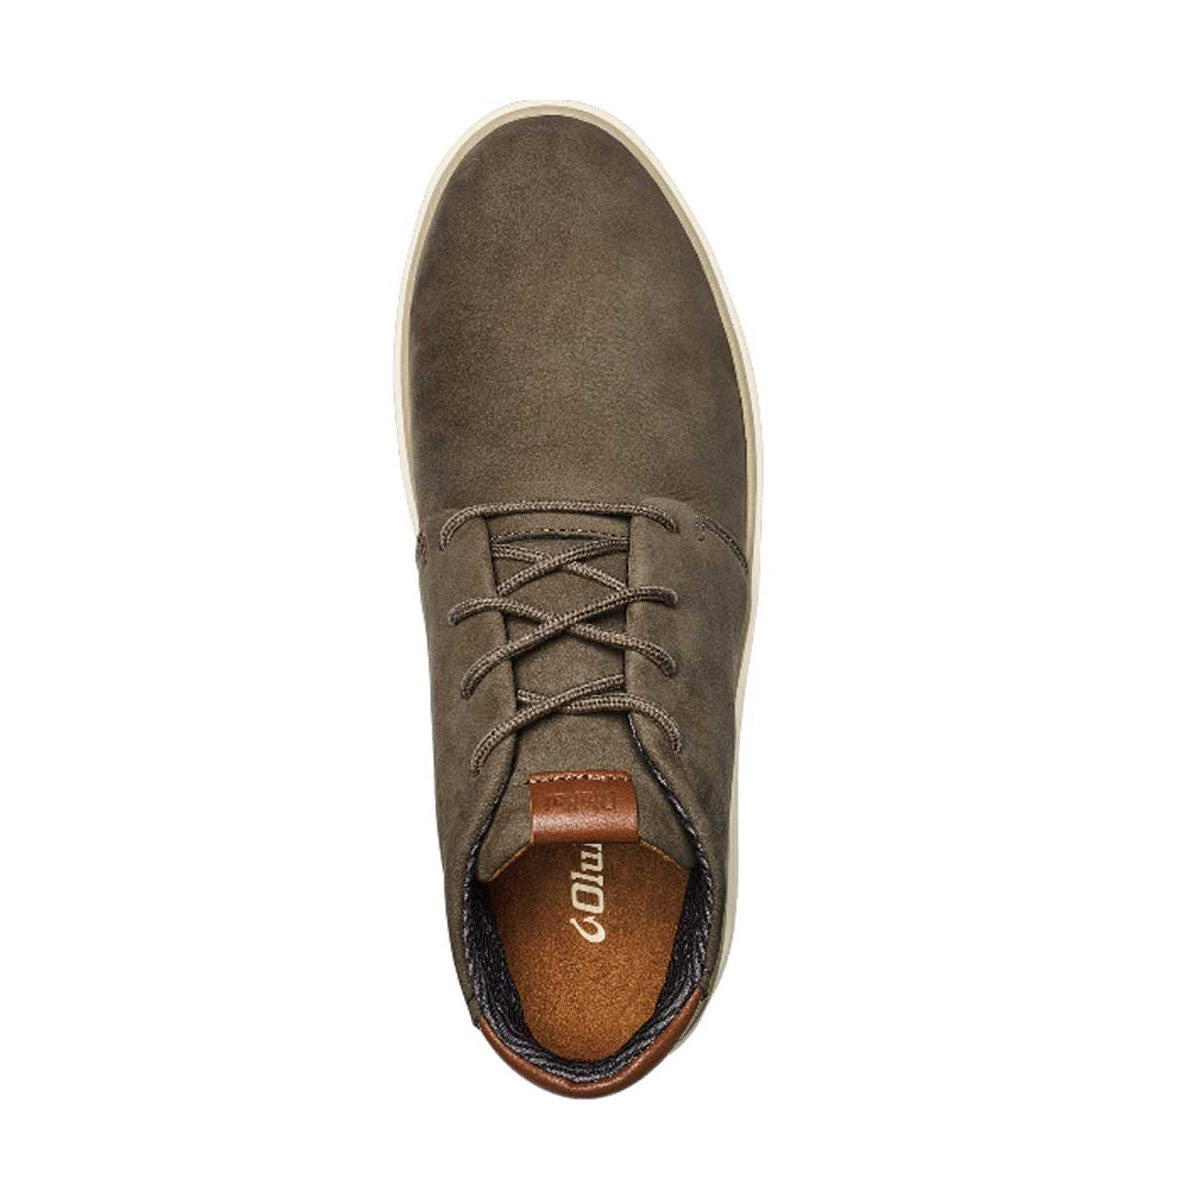 Top view of a single brown waterproof leather lace-up OLUKIA PAPAKU ILI LACE BOOT MUSTANG - MENS shoe on a white background.